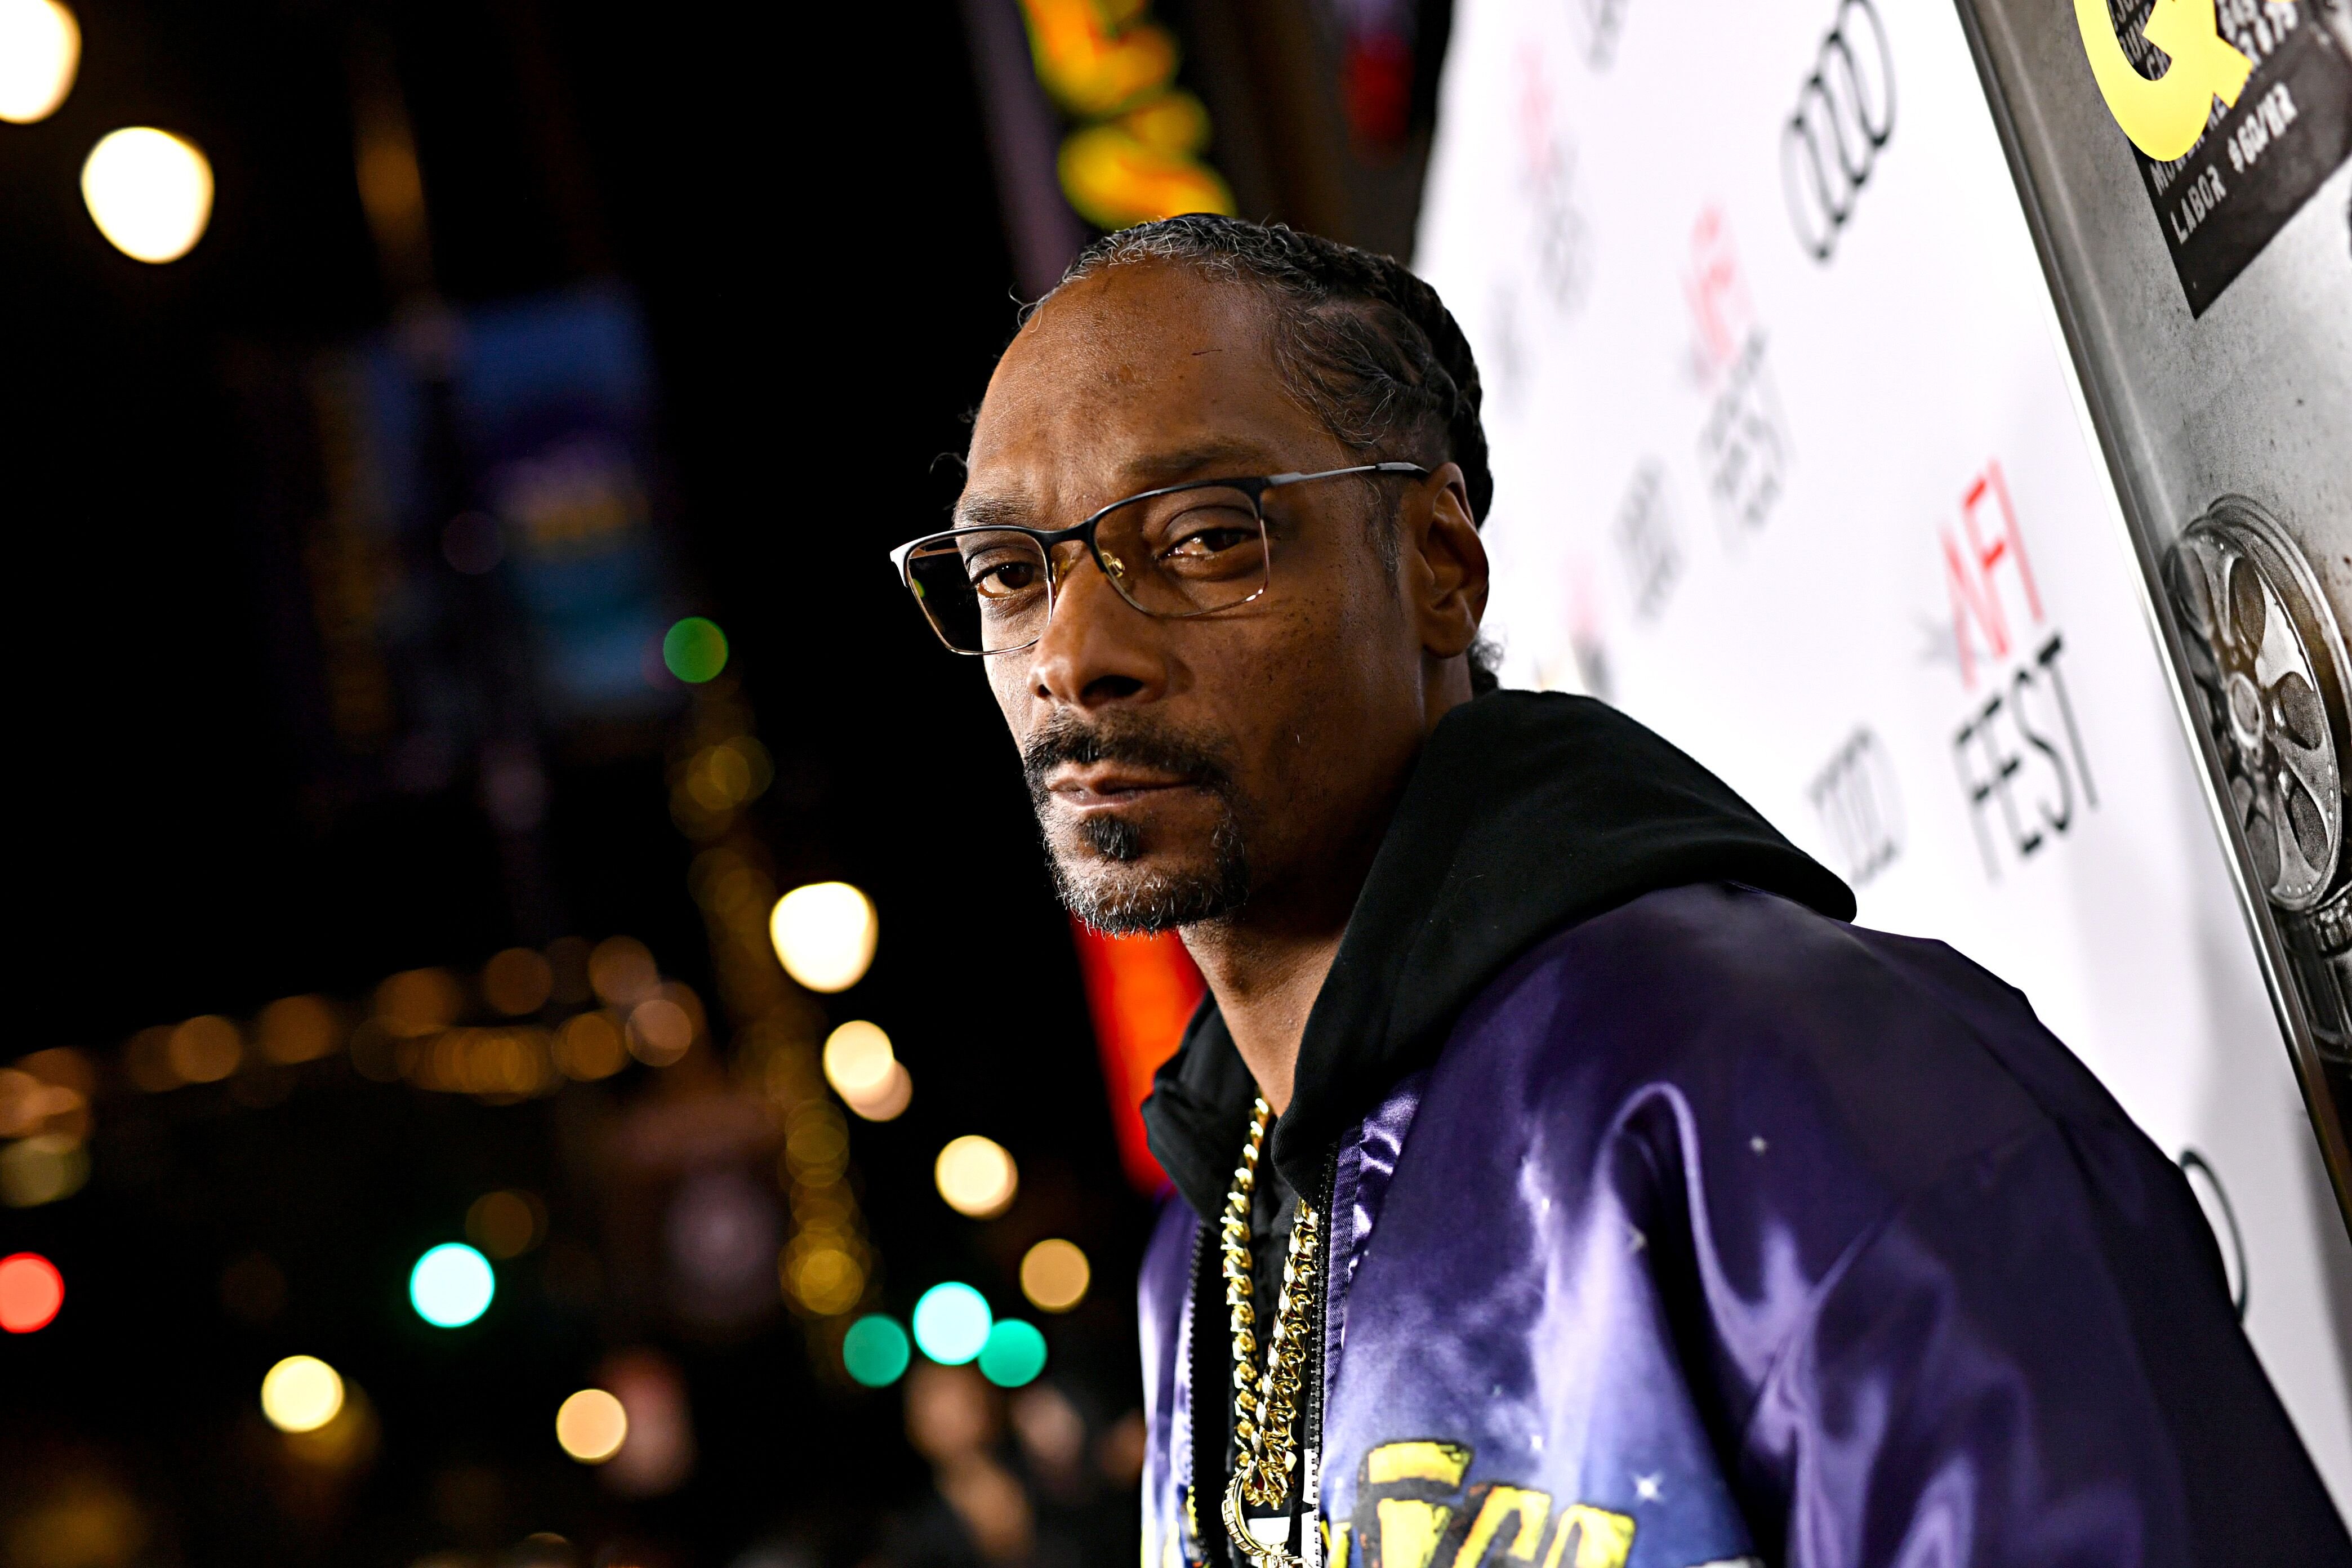 Snoop Dogg attends the AFI Fest 2019 | Source: Getty Images/GlobalImagesUkraine 